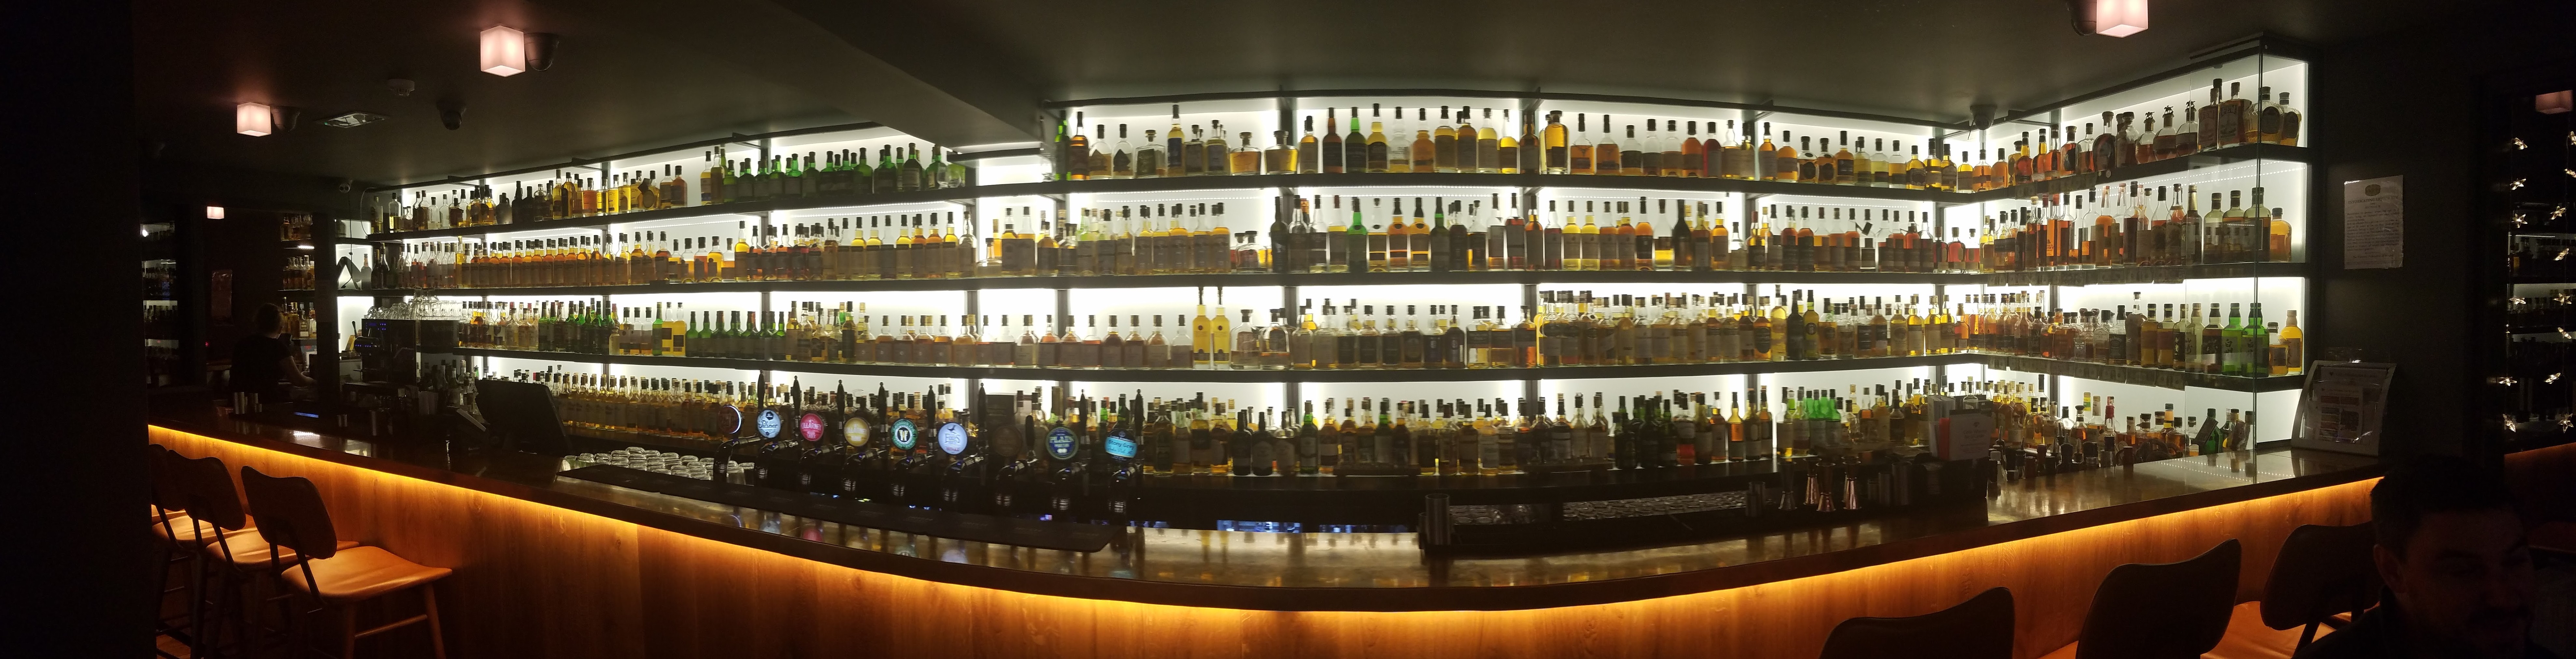 Over 1200 choices of whiskeys and scotch